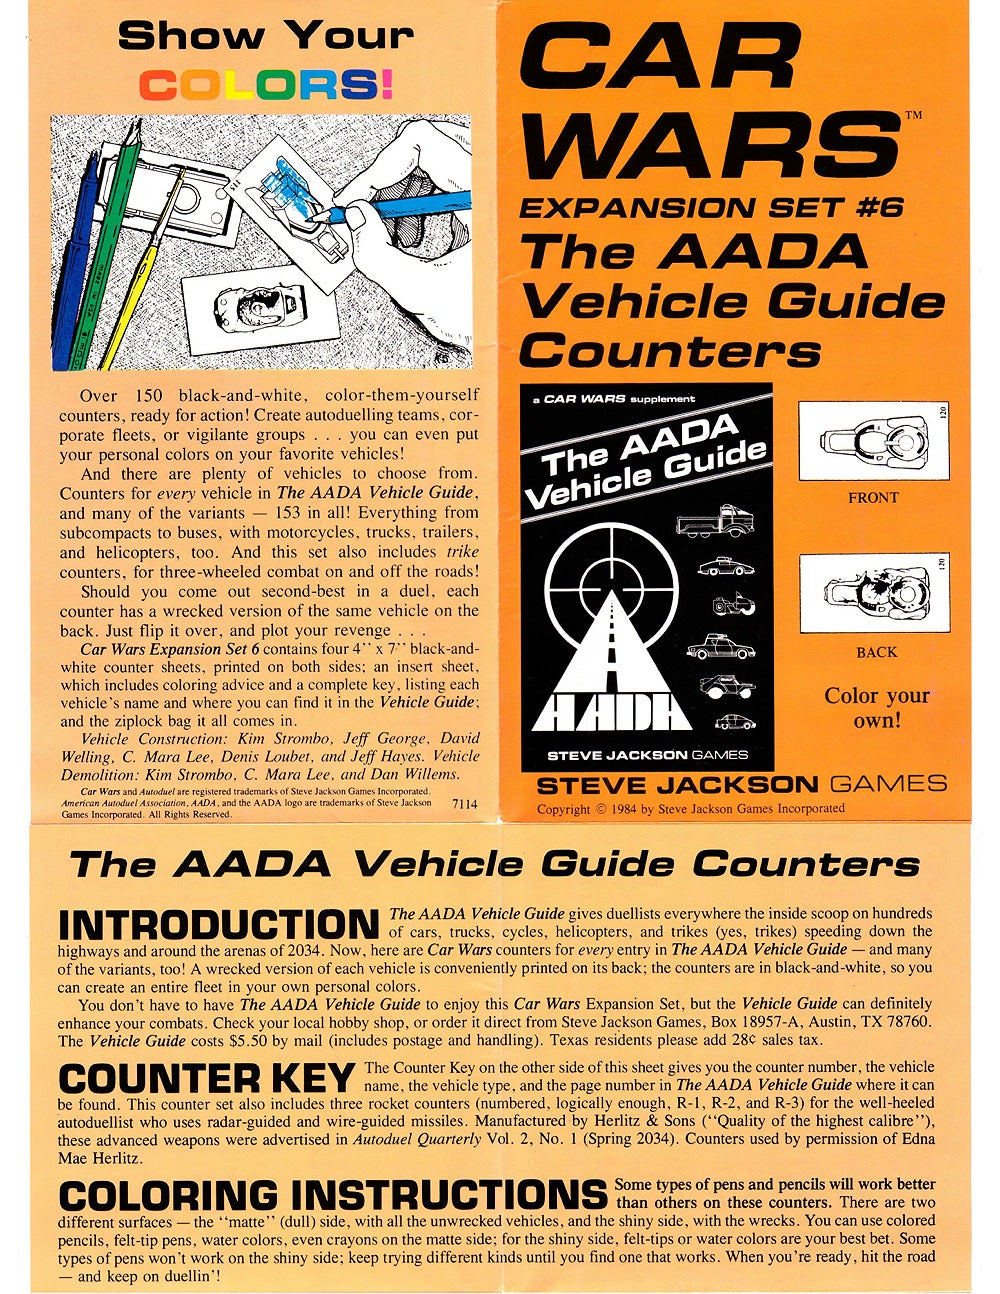 Car Wars Expansion Set 6 - The AADA Vehicle Guide Counters